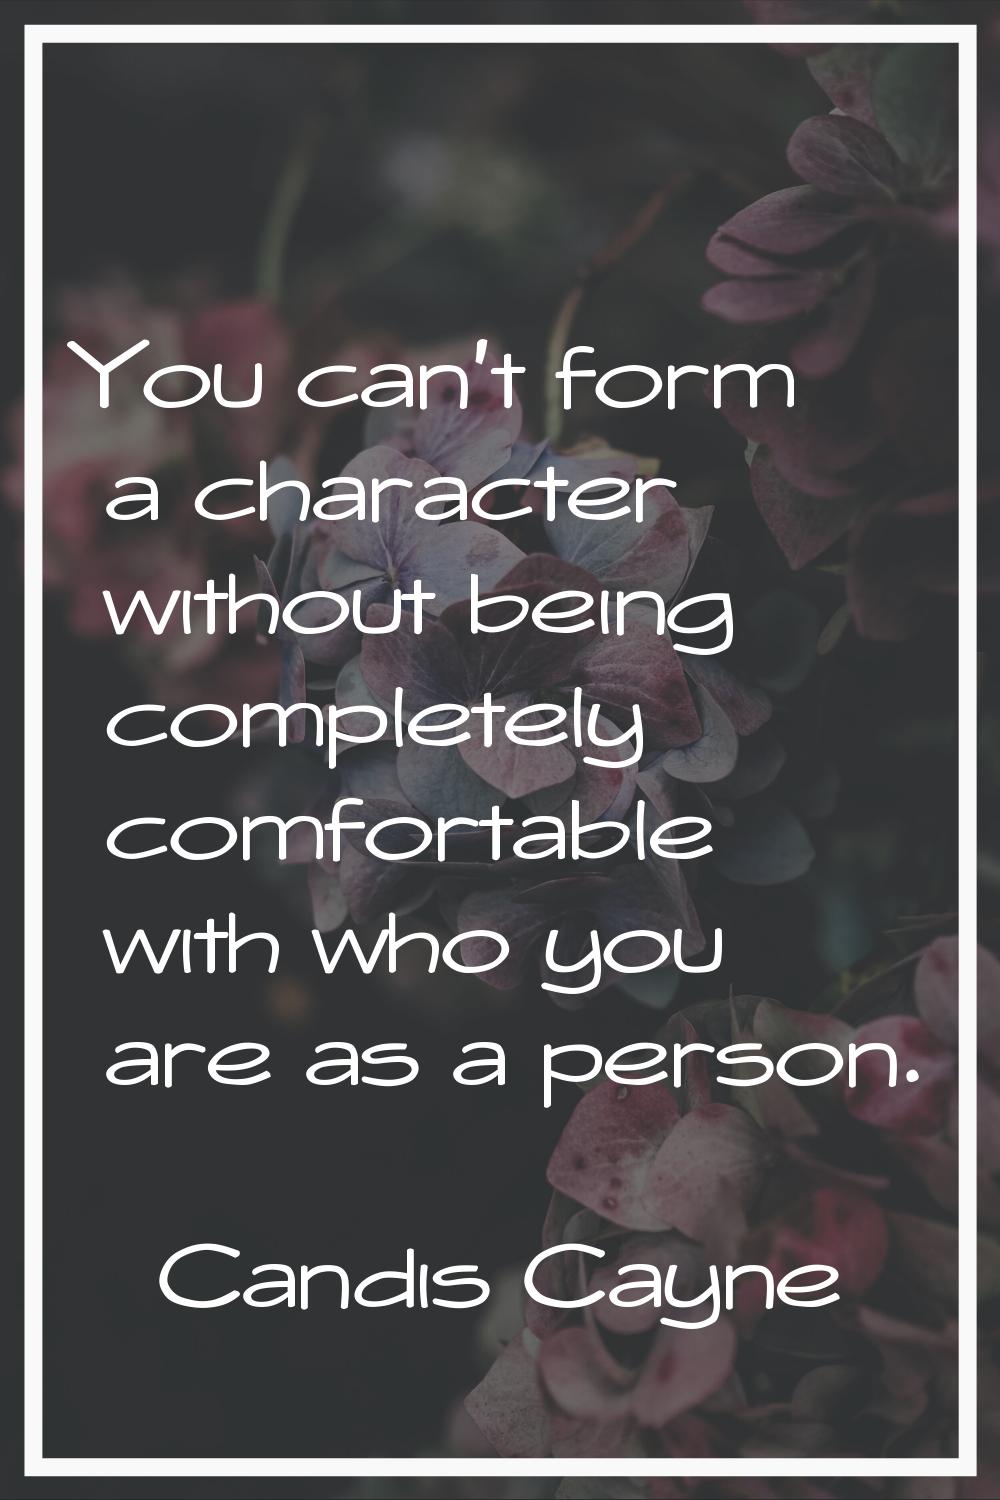 You can't form a character without being completely comfortable with who you are as a person.